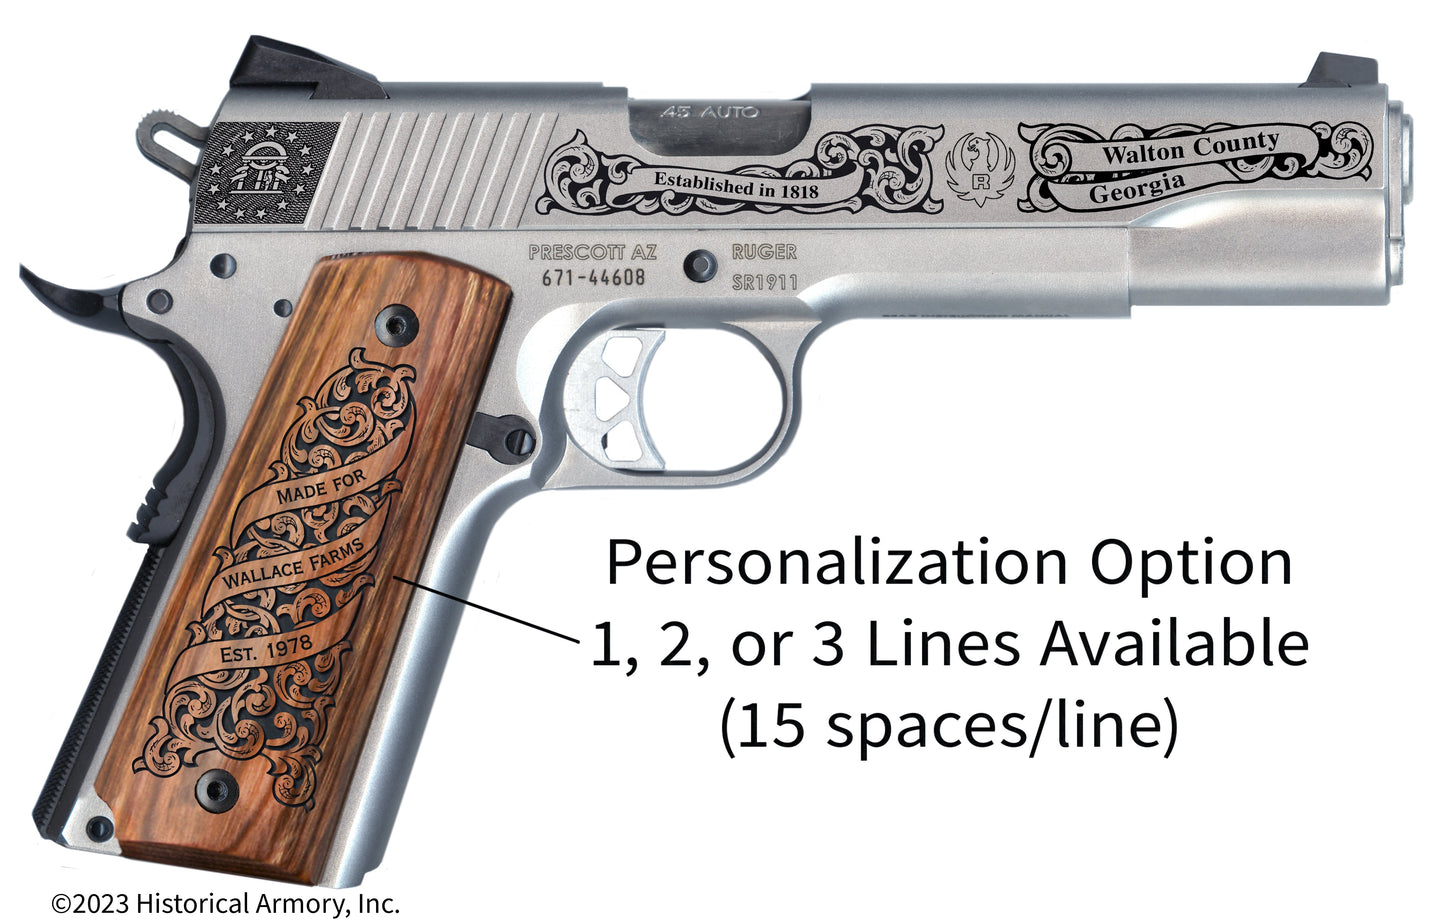 Walton County Georgia Personalized Engraved .45 Auto Ruger 1911